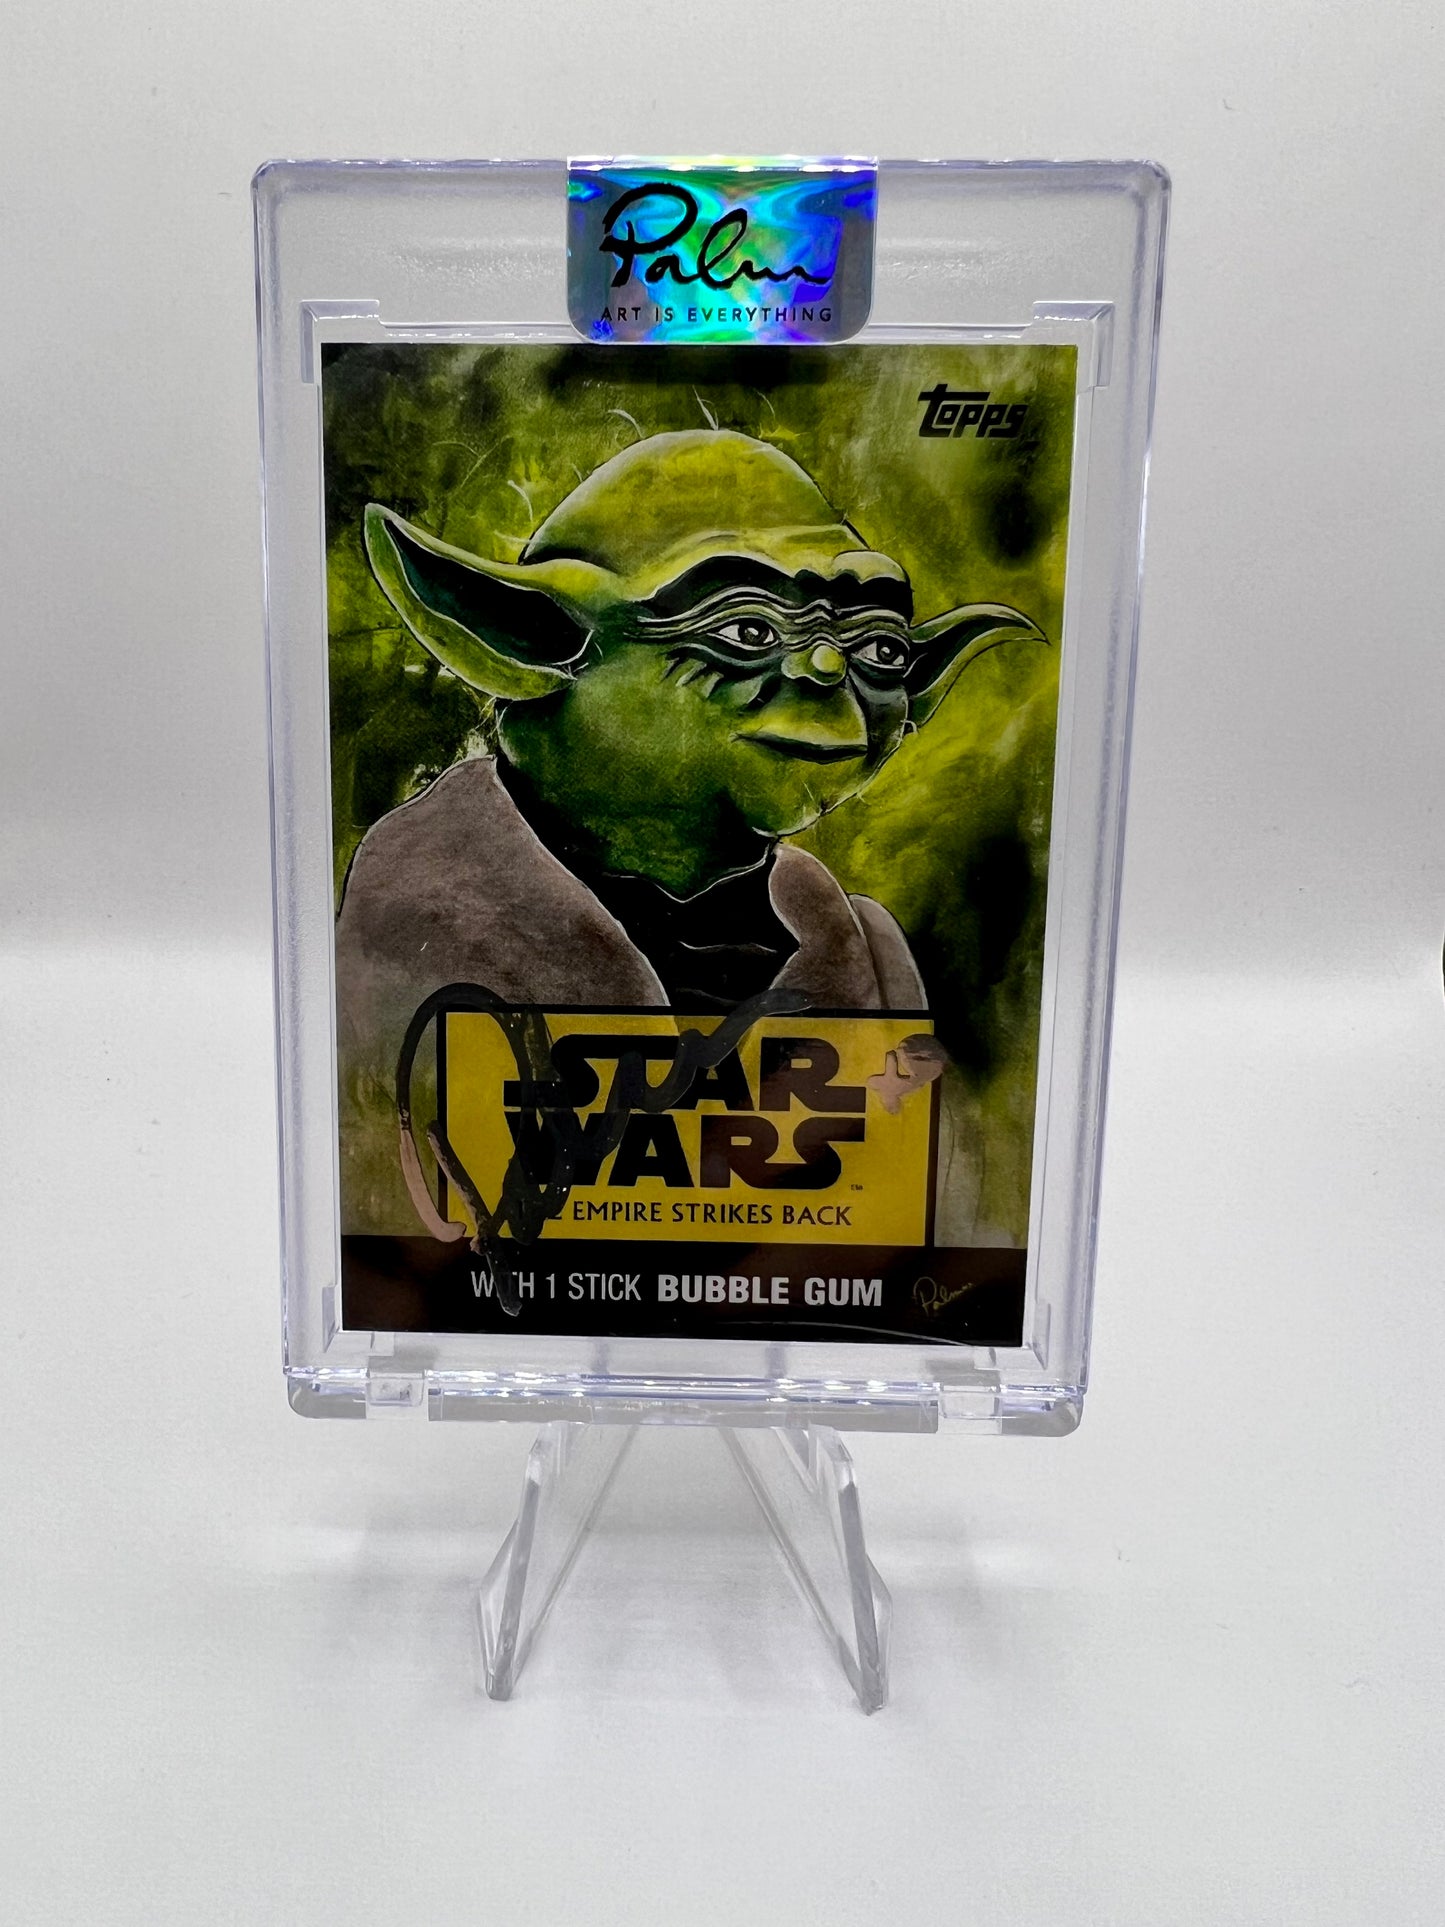 Yoda - Topps Star Wars - Autographed